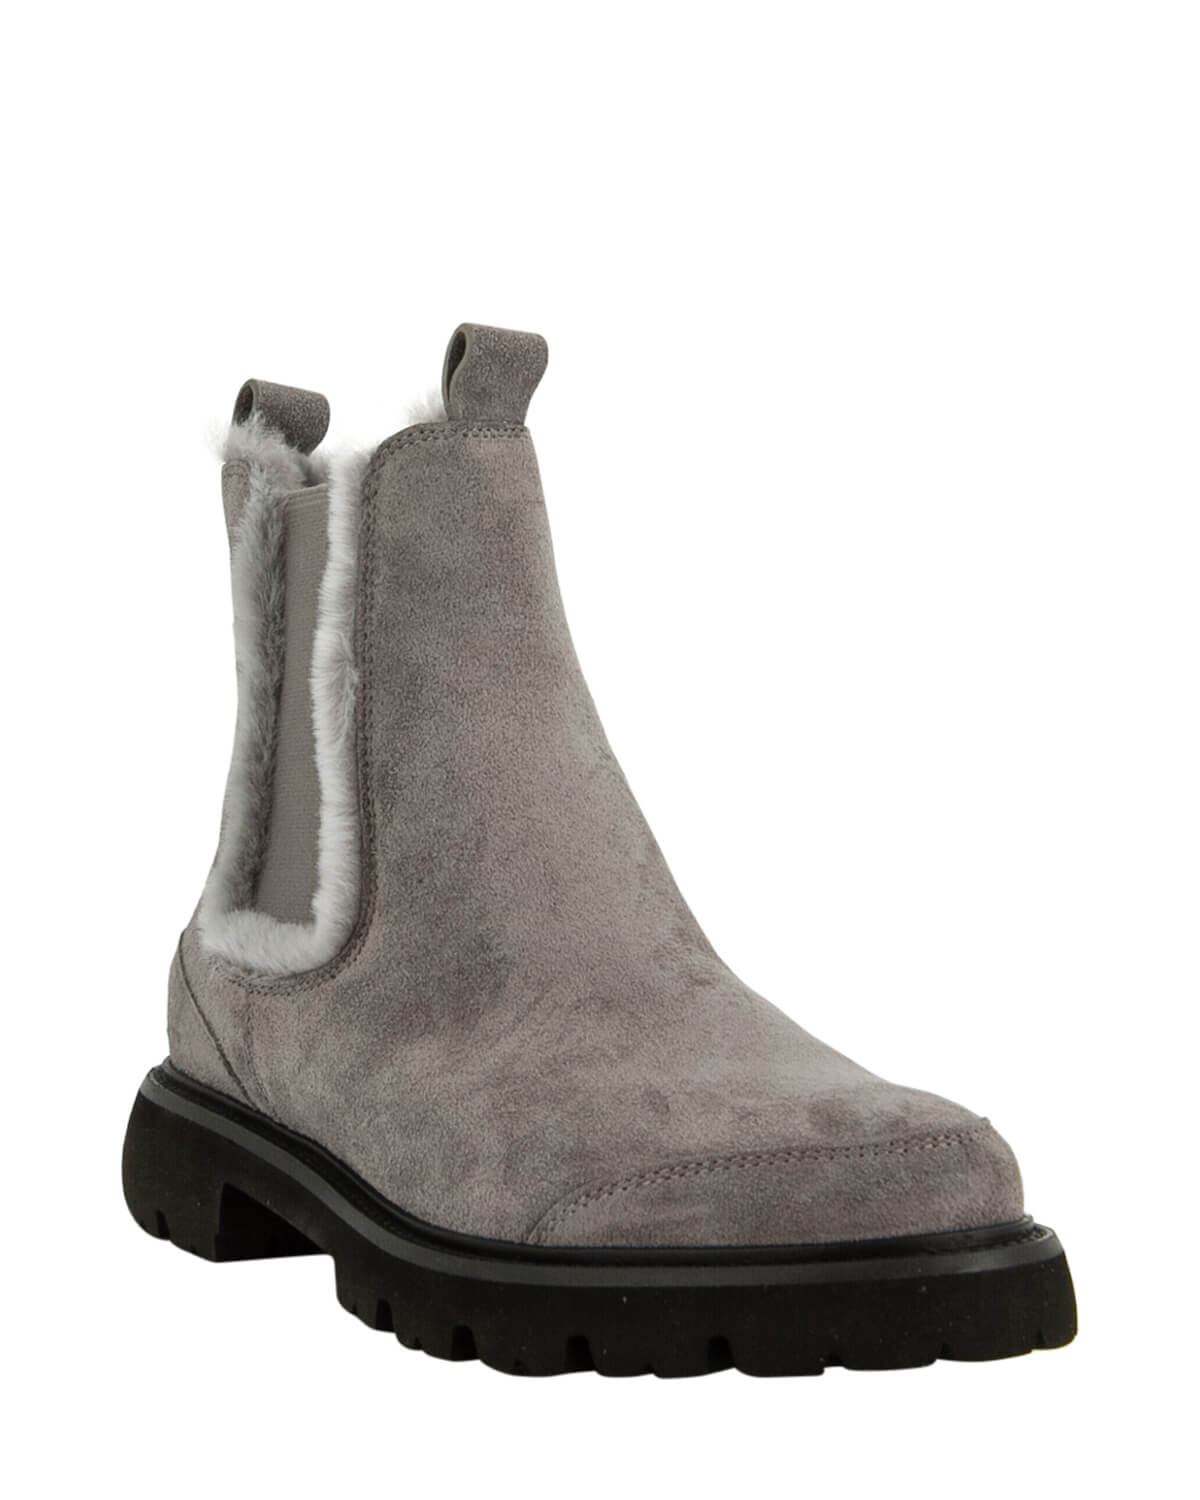 CHELSEA BOOTS